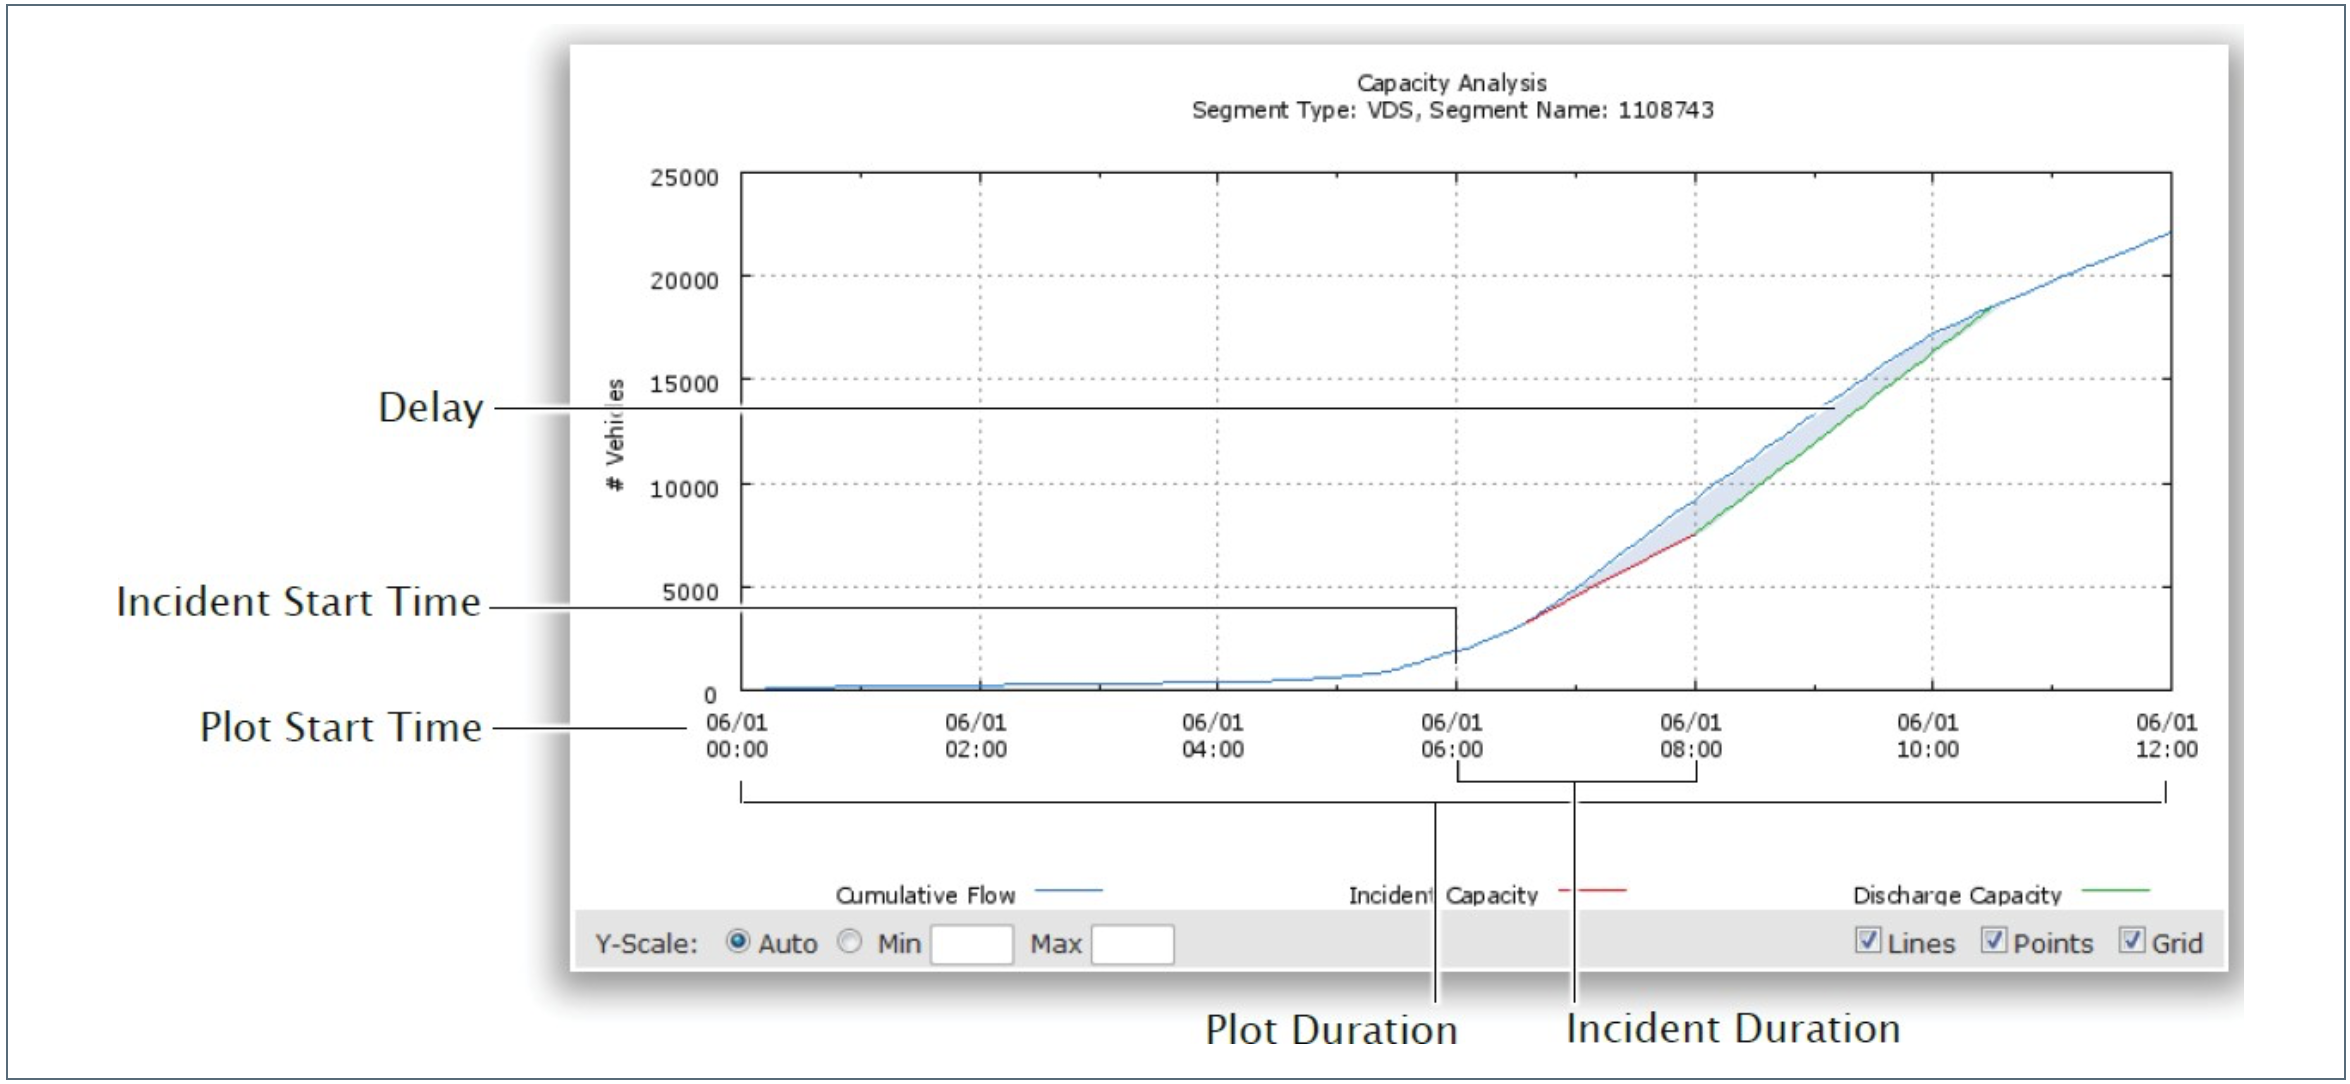 Line chart showing cumulative vehicle arrival and departure curves at incident site indicating the reduced road capacity and discharge capacity, as well as the extent of delays and queue lengths by time of day.